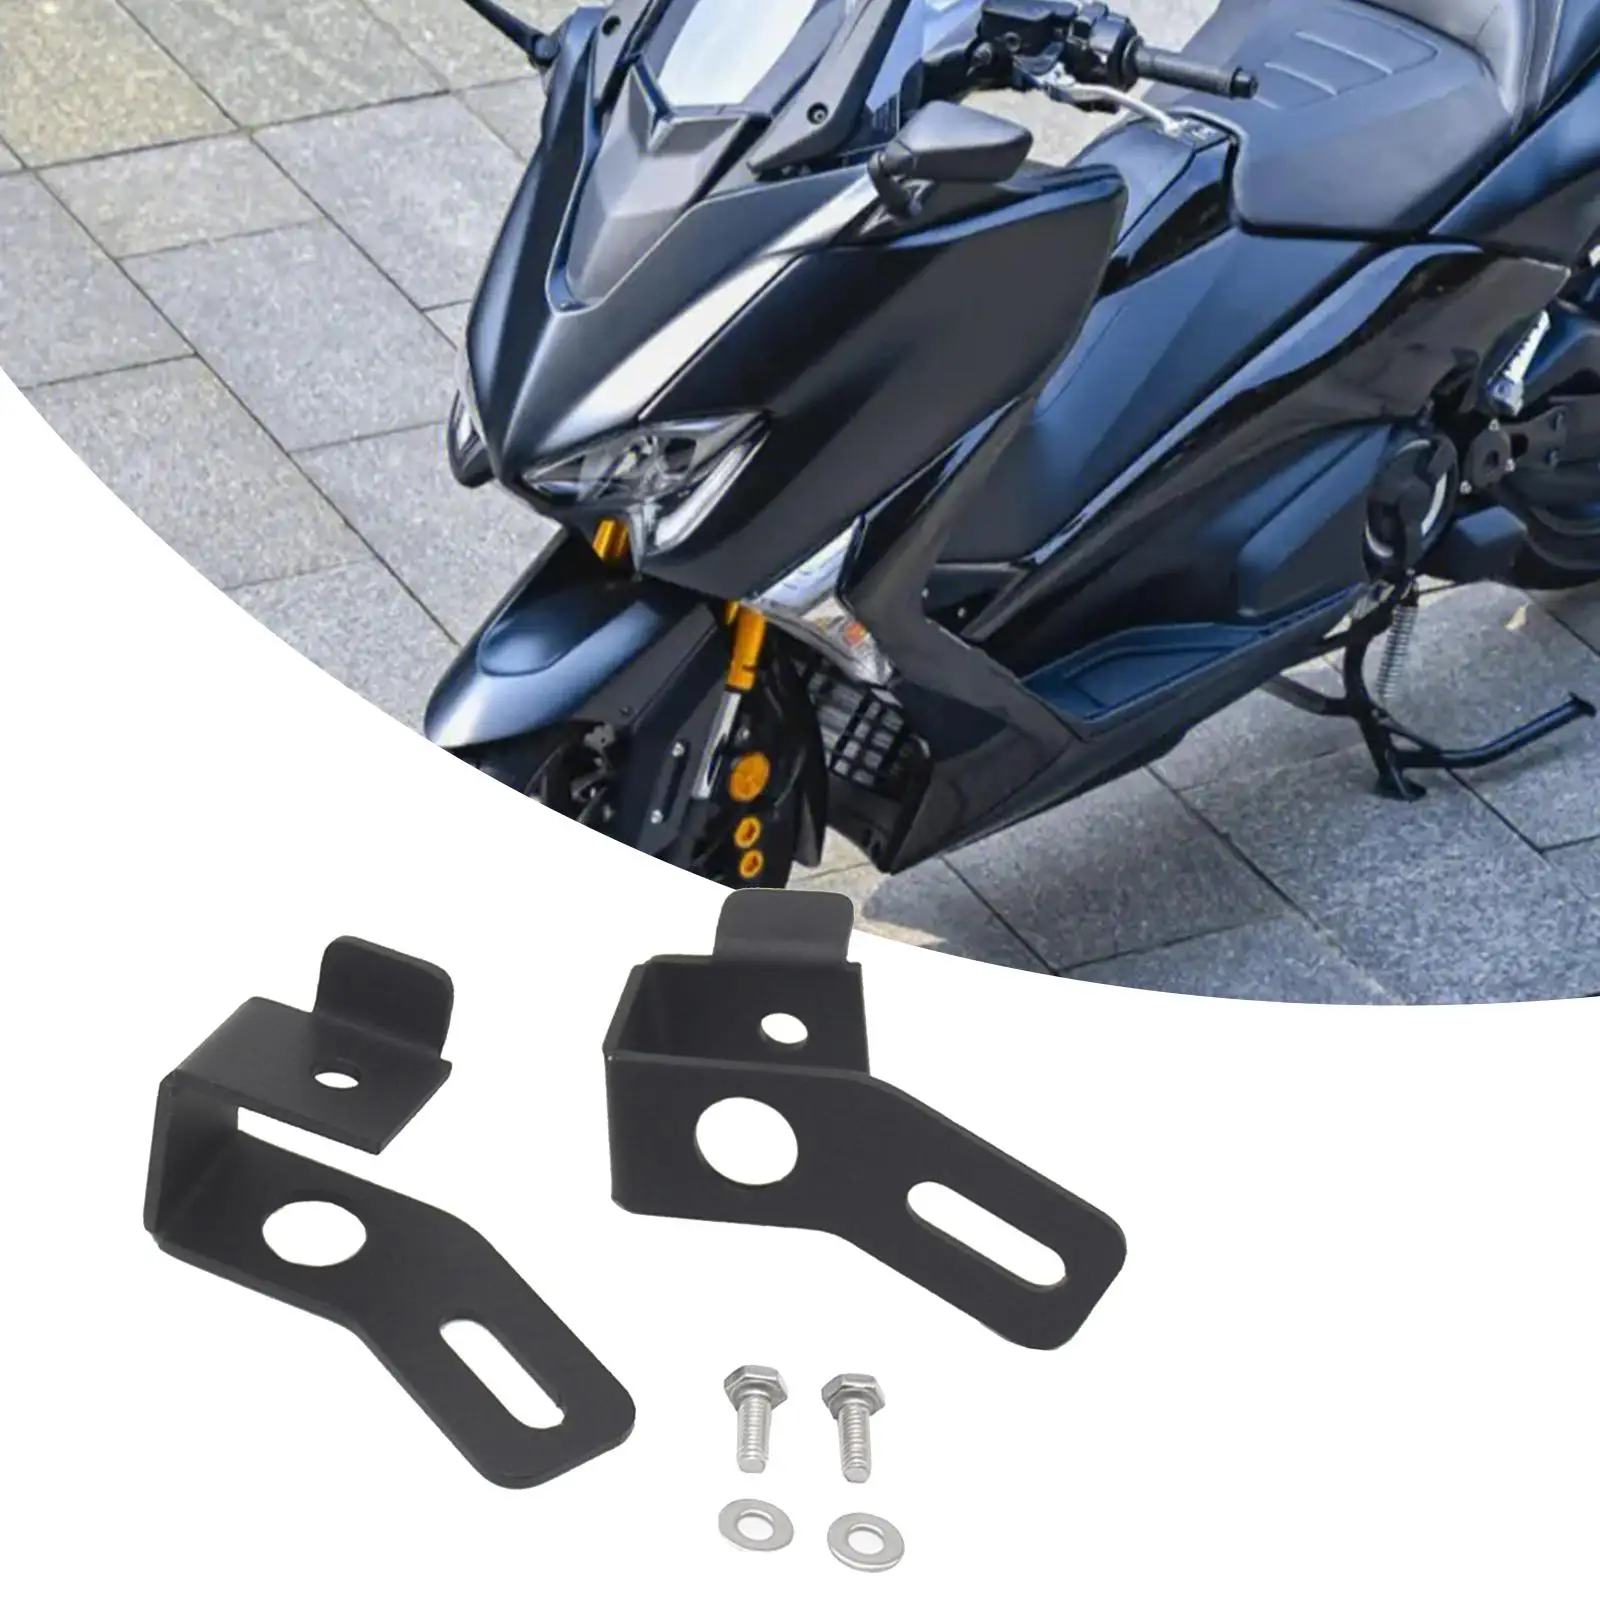 Fog Lamp Spot Lamp Auxiliary Support Replacement Easy to Install Motorcycle Mounting Bracket for Yamaha Tmax 530 2017-2021